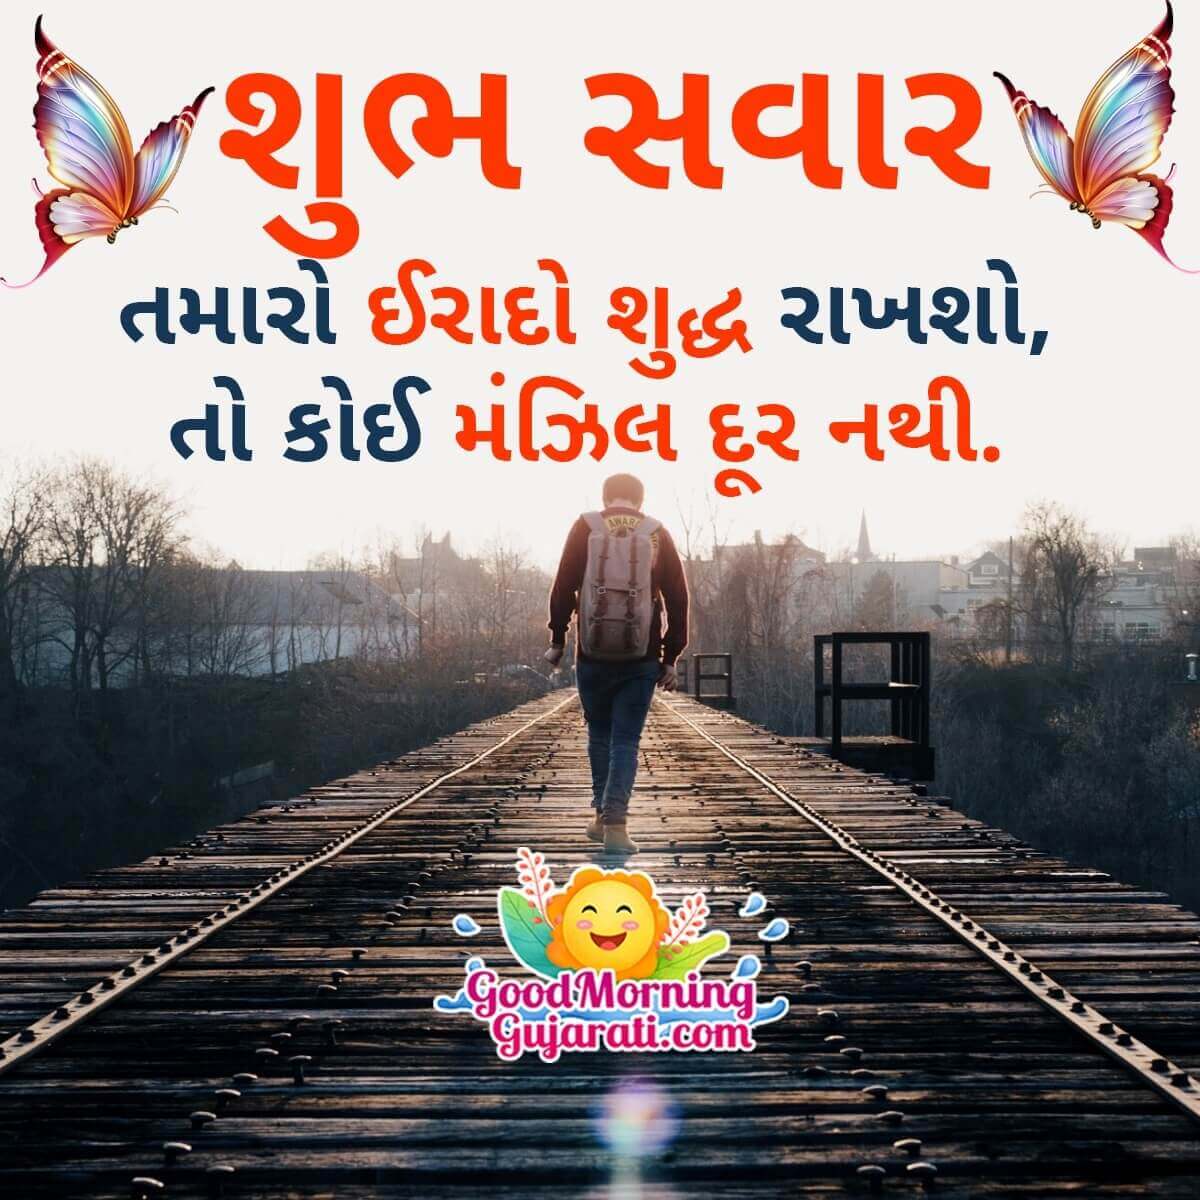 Good Morning Best Thought Image In Gujarati